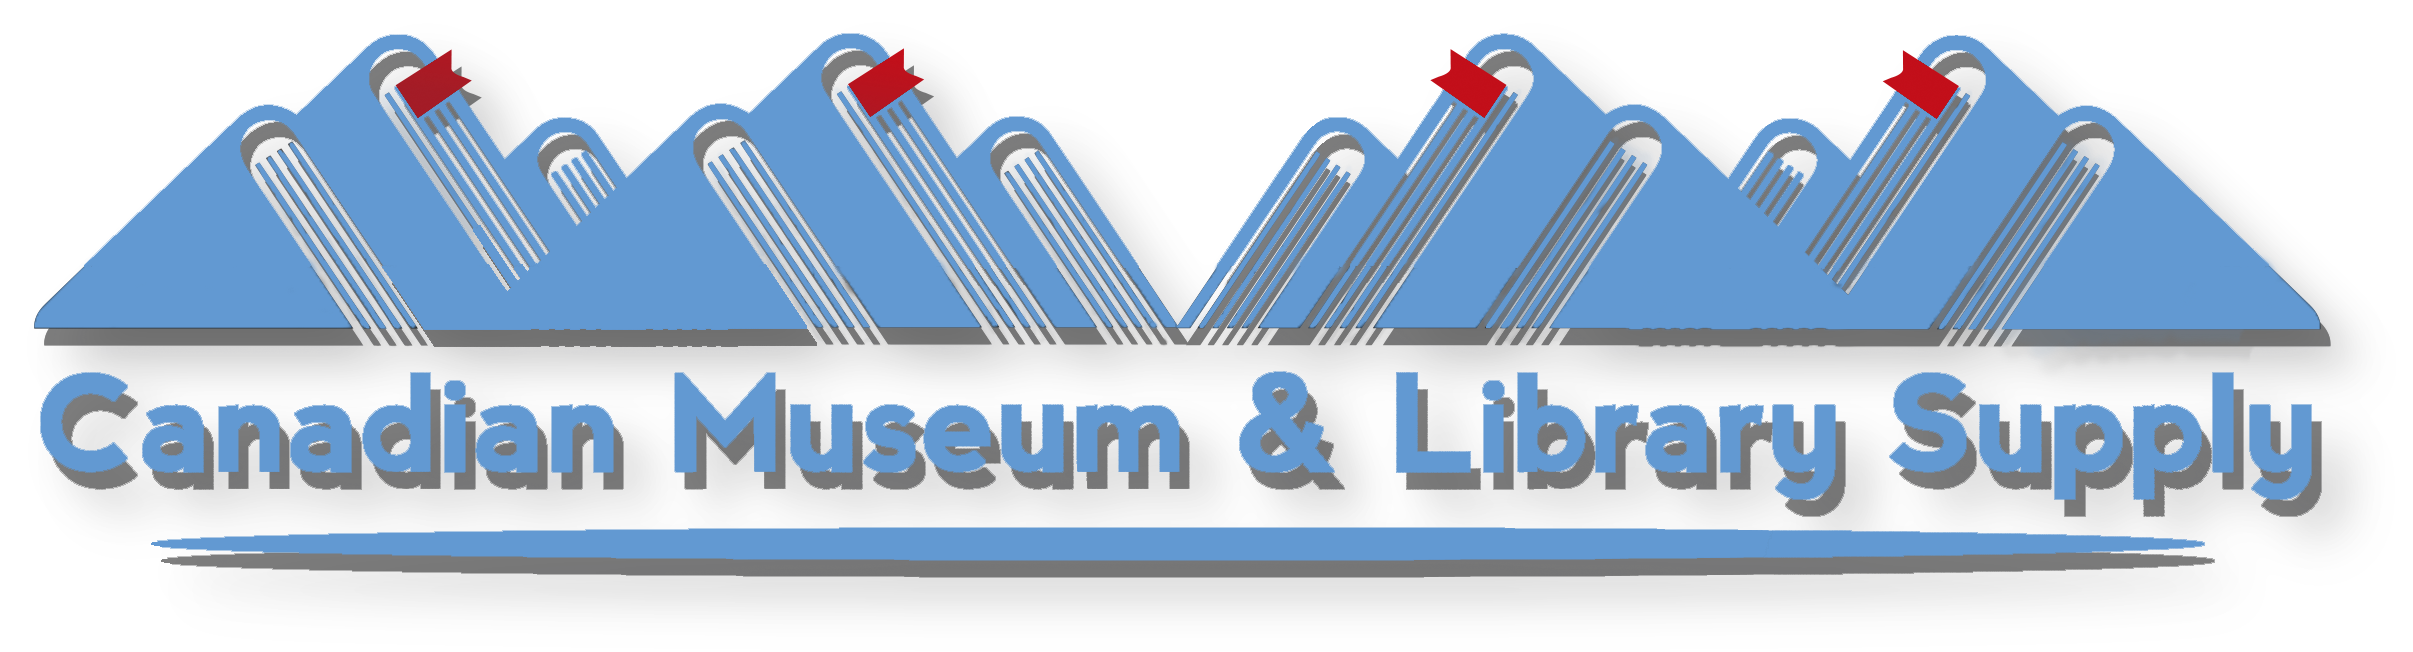 Canadian Museum & Library Supply